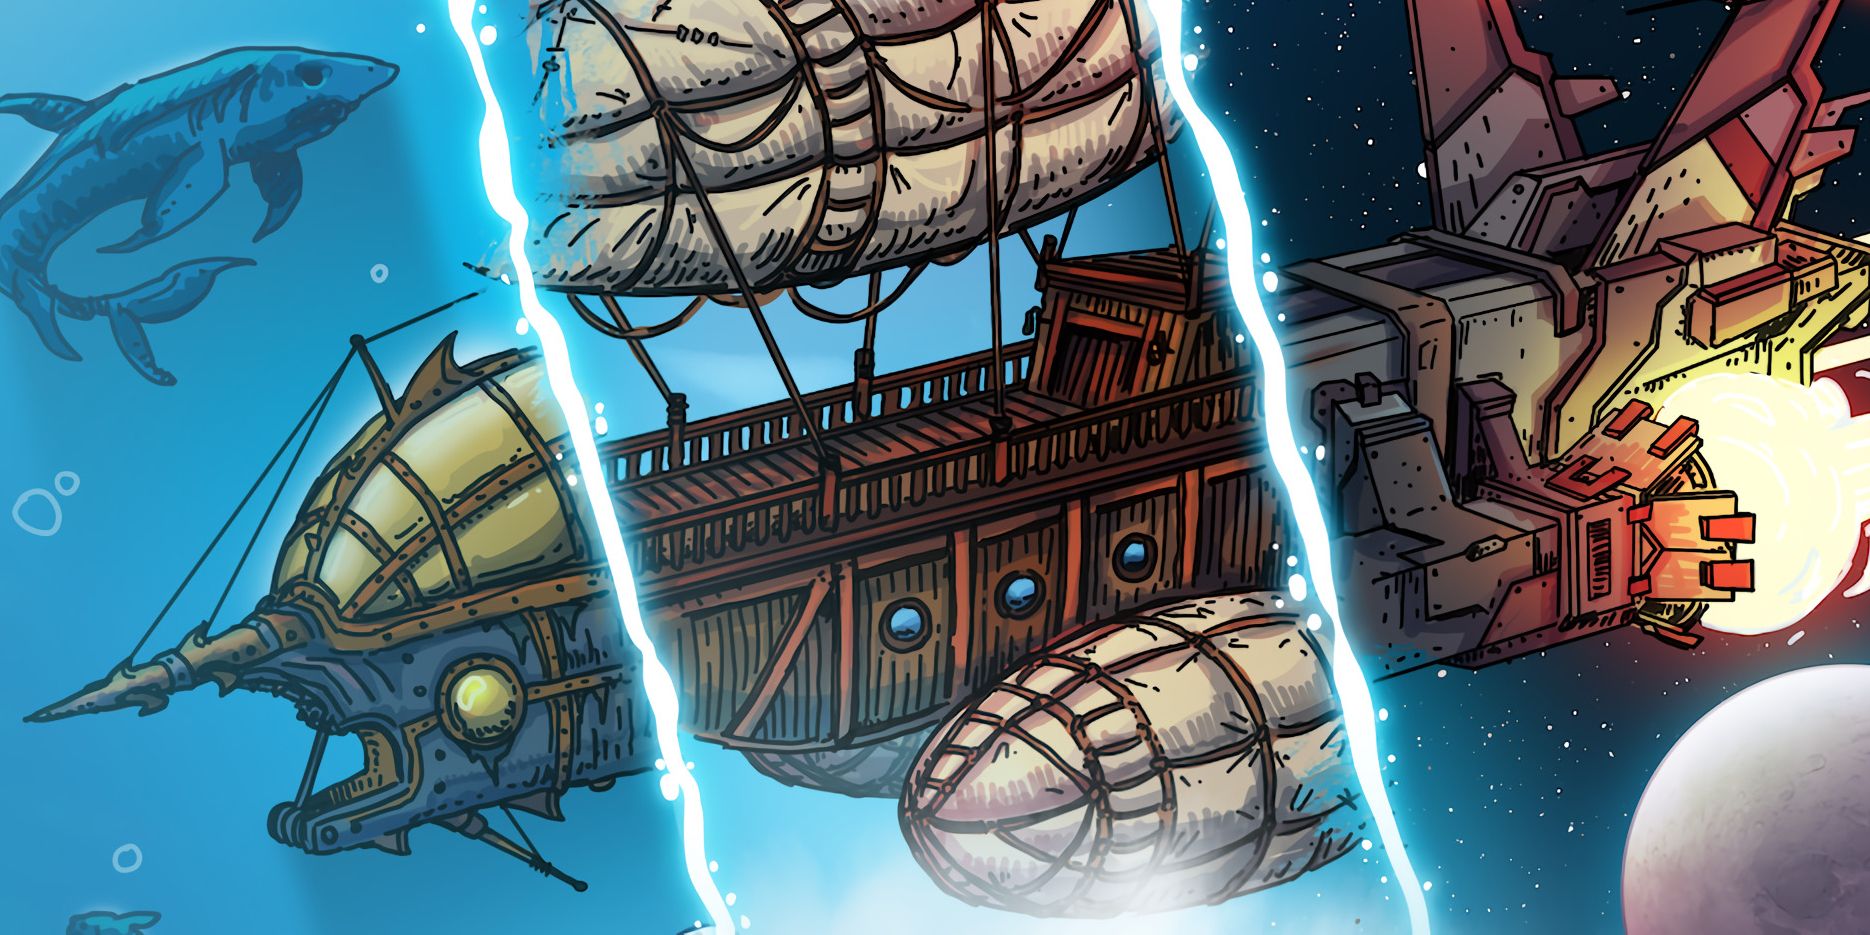 Key art for Sky Zephyrs, a new 5e supplement, showing three different Spelljammer ships mid-flight, spliced together to appear like one continuous image.